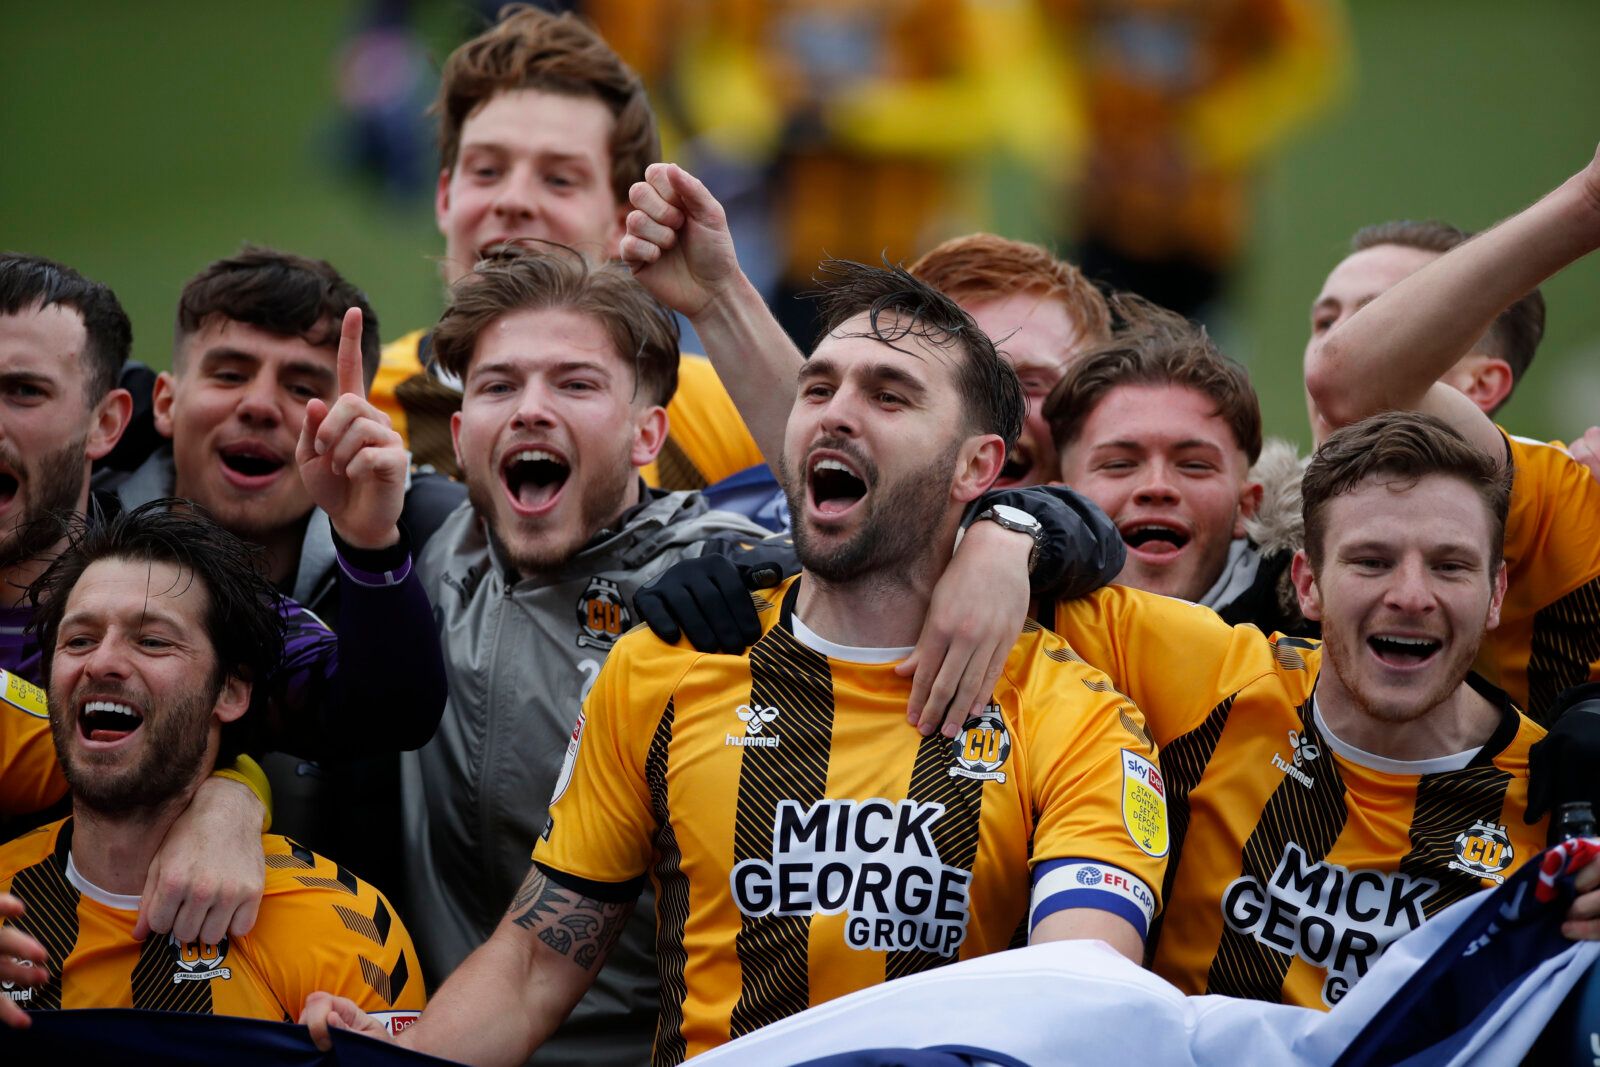 Soccer Football - League Two - Cambridge United v Grimsby Town - Abbey Stadium, Cambridge, Britain - May 8, 2021 Cambridge's Wesley Hoolahan, Greg Taylor and Paul Mullin celebrate promotion to League One after the match with fans Action Images/Paul Childs EDITORIAL USE ONLY. No use with unauthorized audio, video, data, fixture lists, club/league logos or 'live' services. Online in-match use limited to 75 images, no video emulation. No use in betting, games or single club /league/player publicati